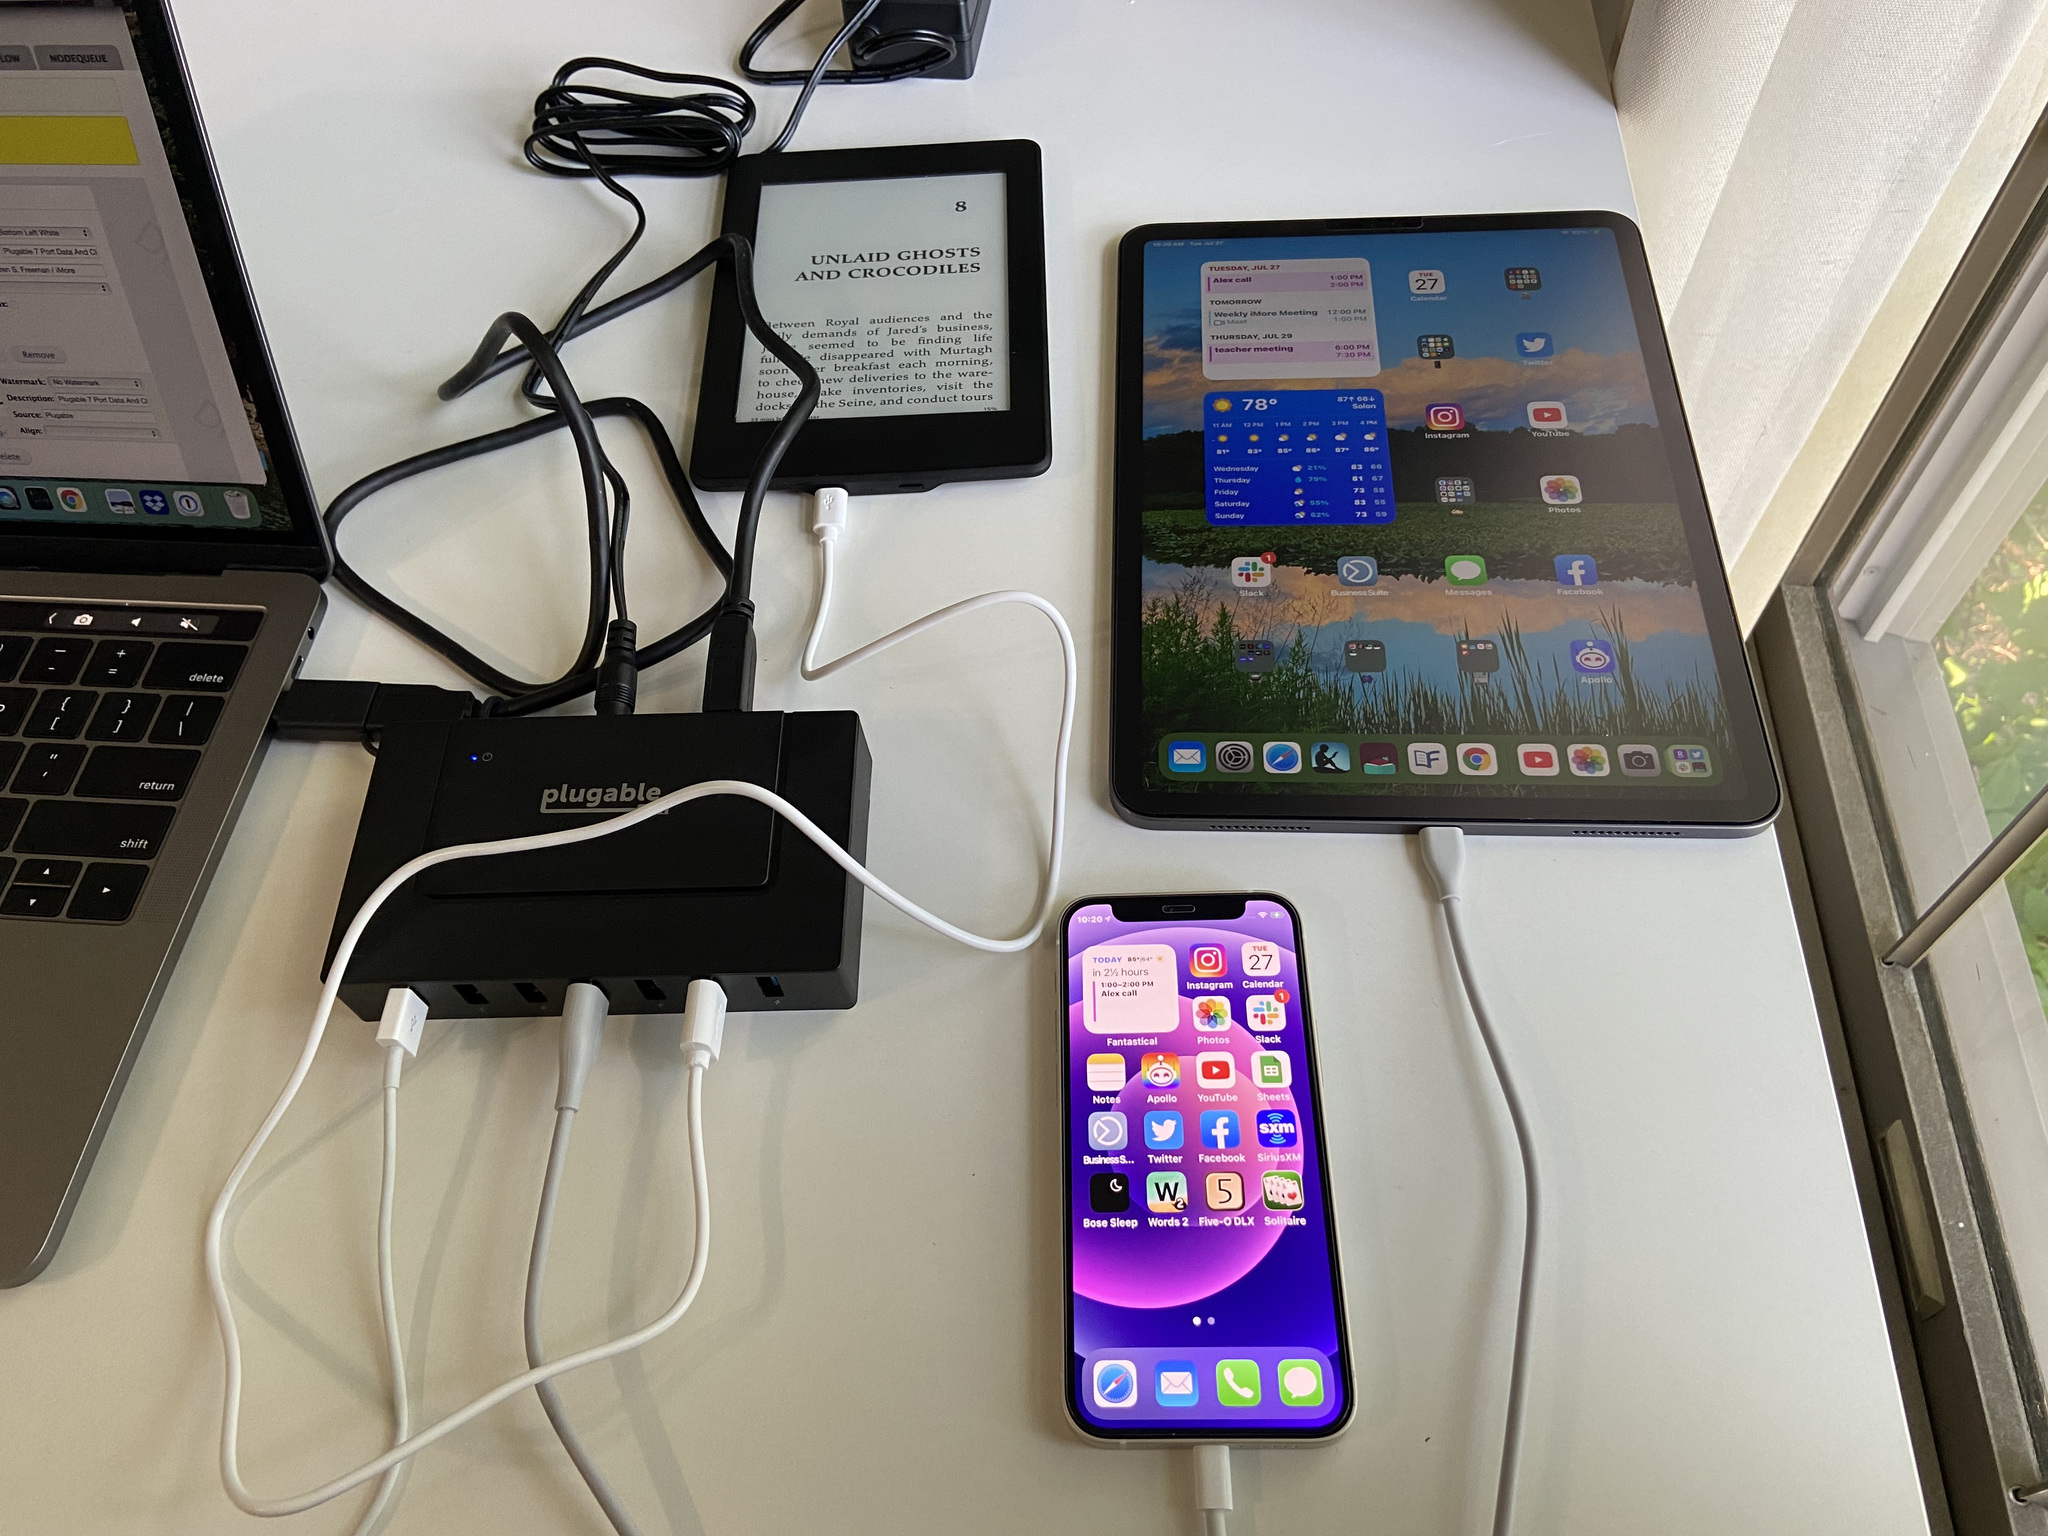 Plugable 7 Port Data And Charging Hub Lifestyle Multiple Items Plugged In